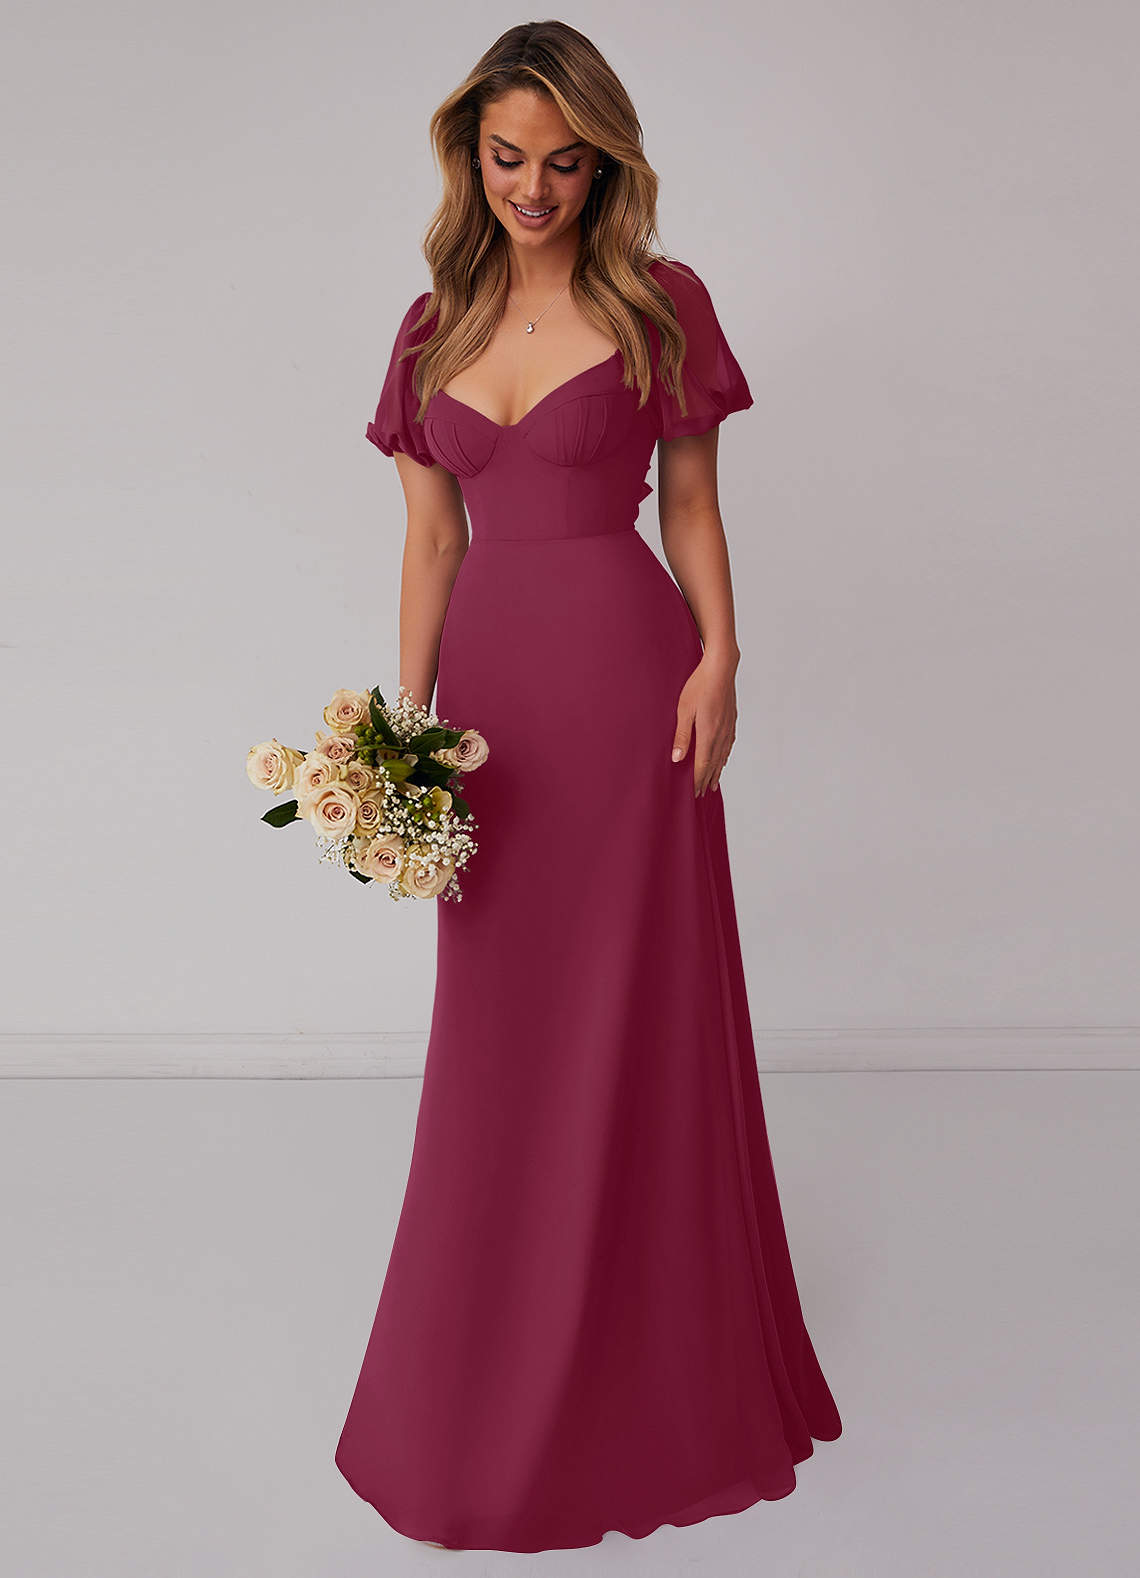 Mulberry Chiffon A-line Dress with Puff Sleeves Bridesmaid Dresses | Azazie